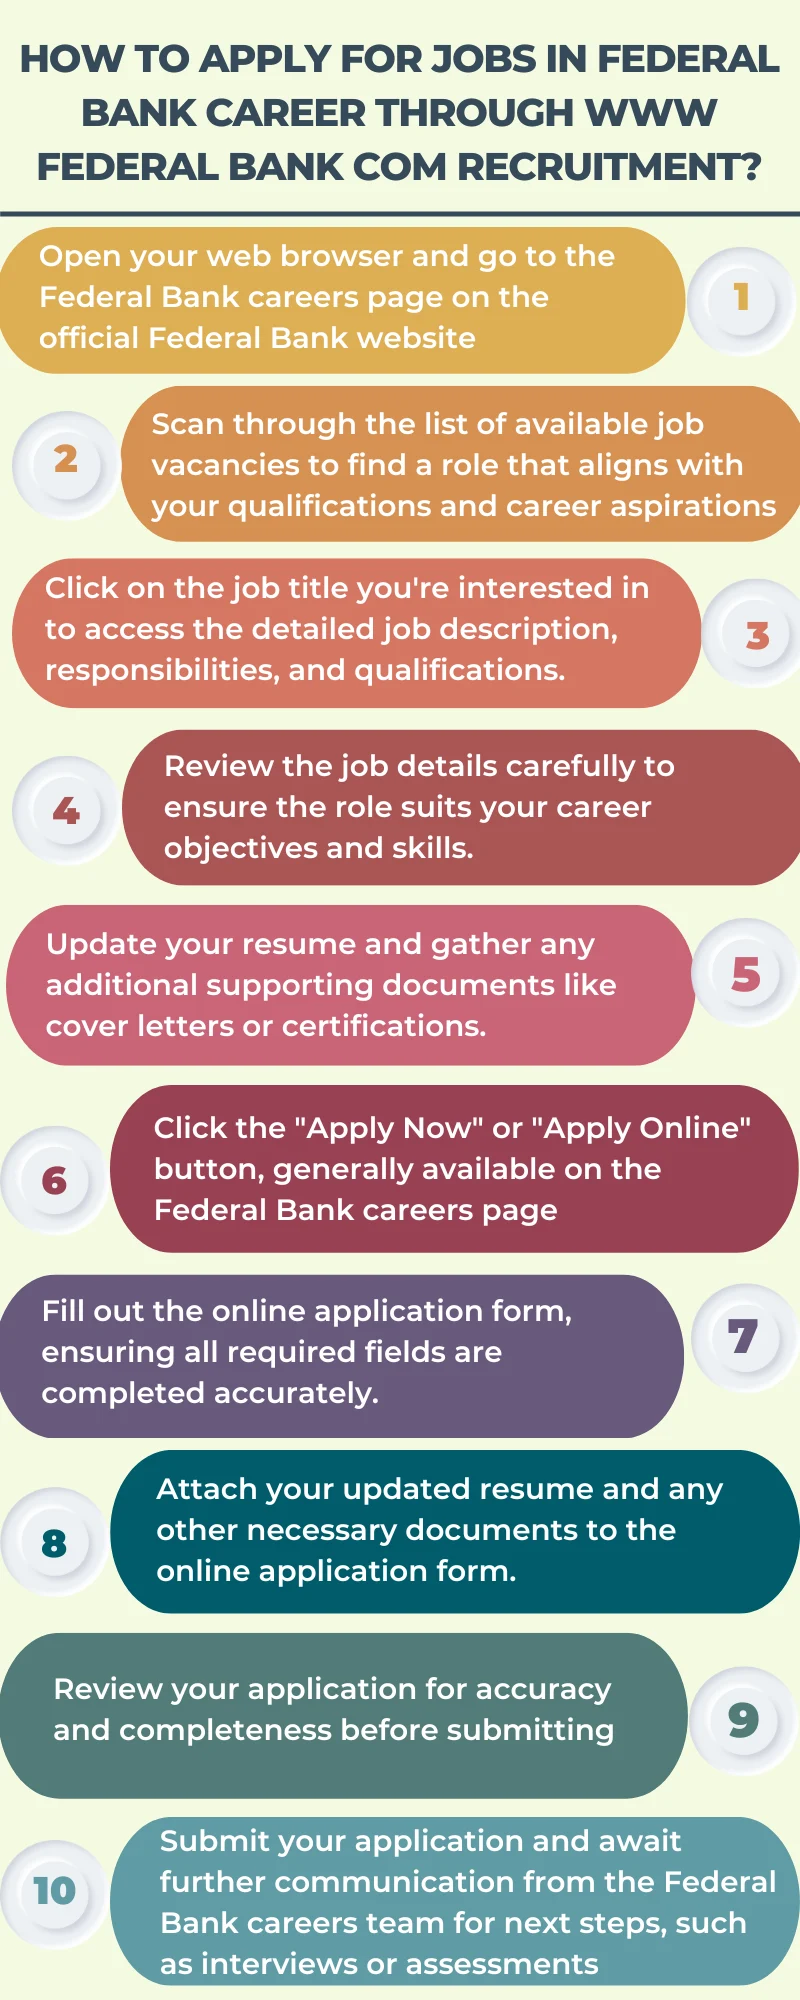 How to Apply for Jobs in Federal Bank Career through www Federal Bank com recruitment?